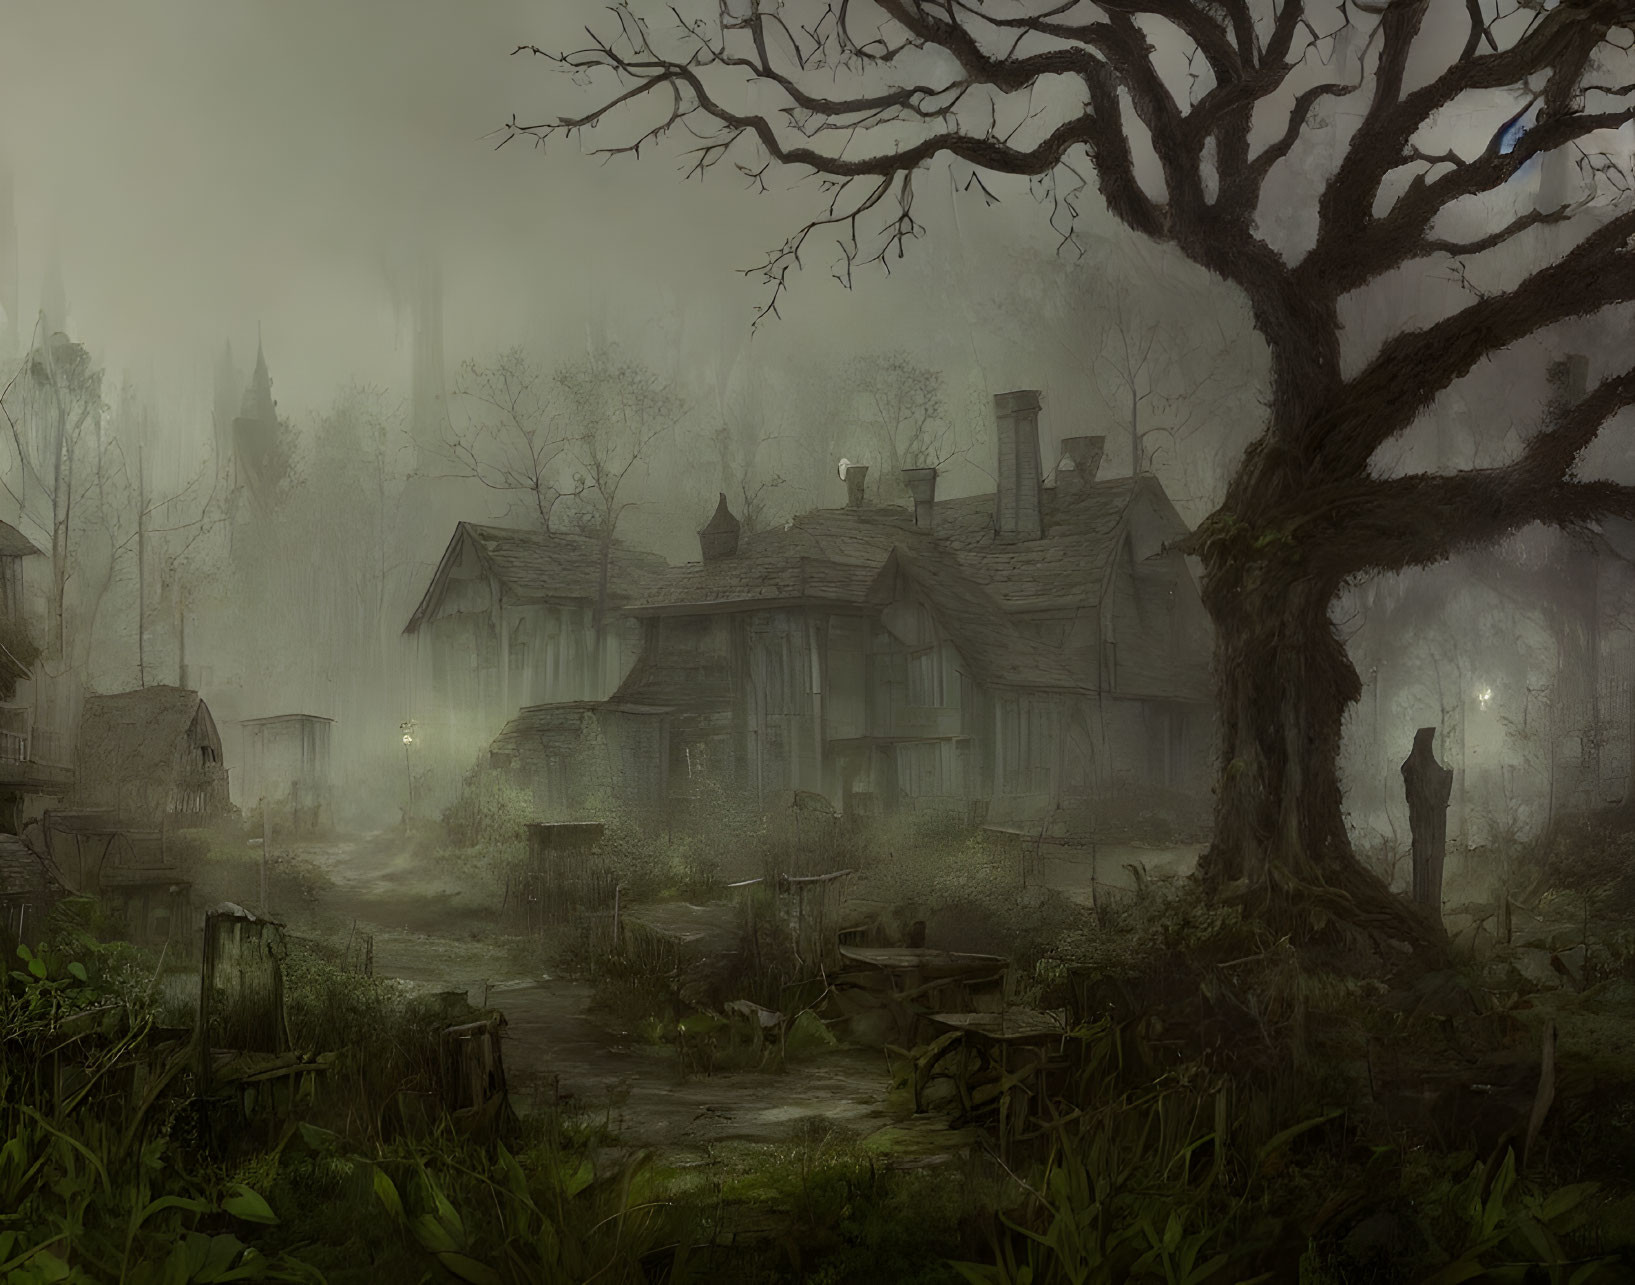 Misty swamp scene with dilapidated houses, gnarled tree, and figure by lamp post